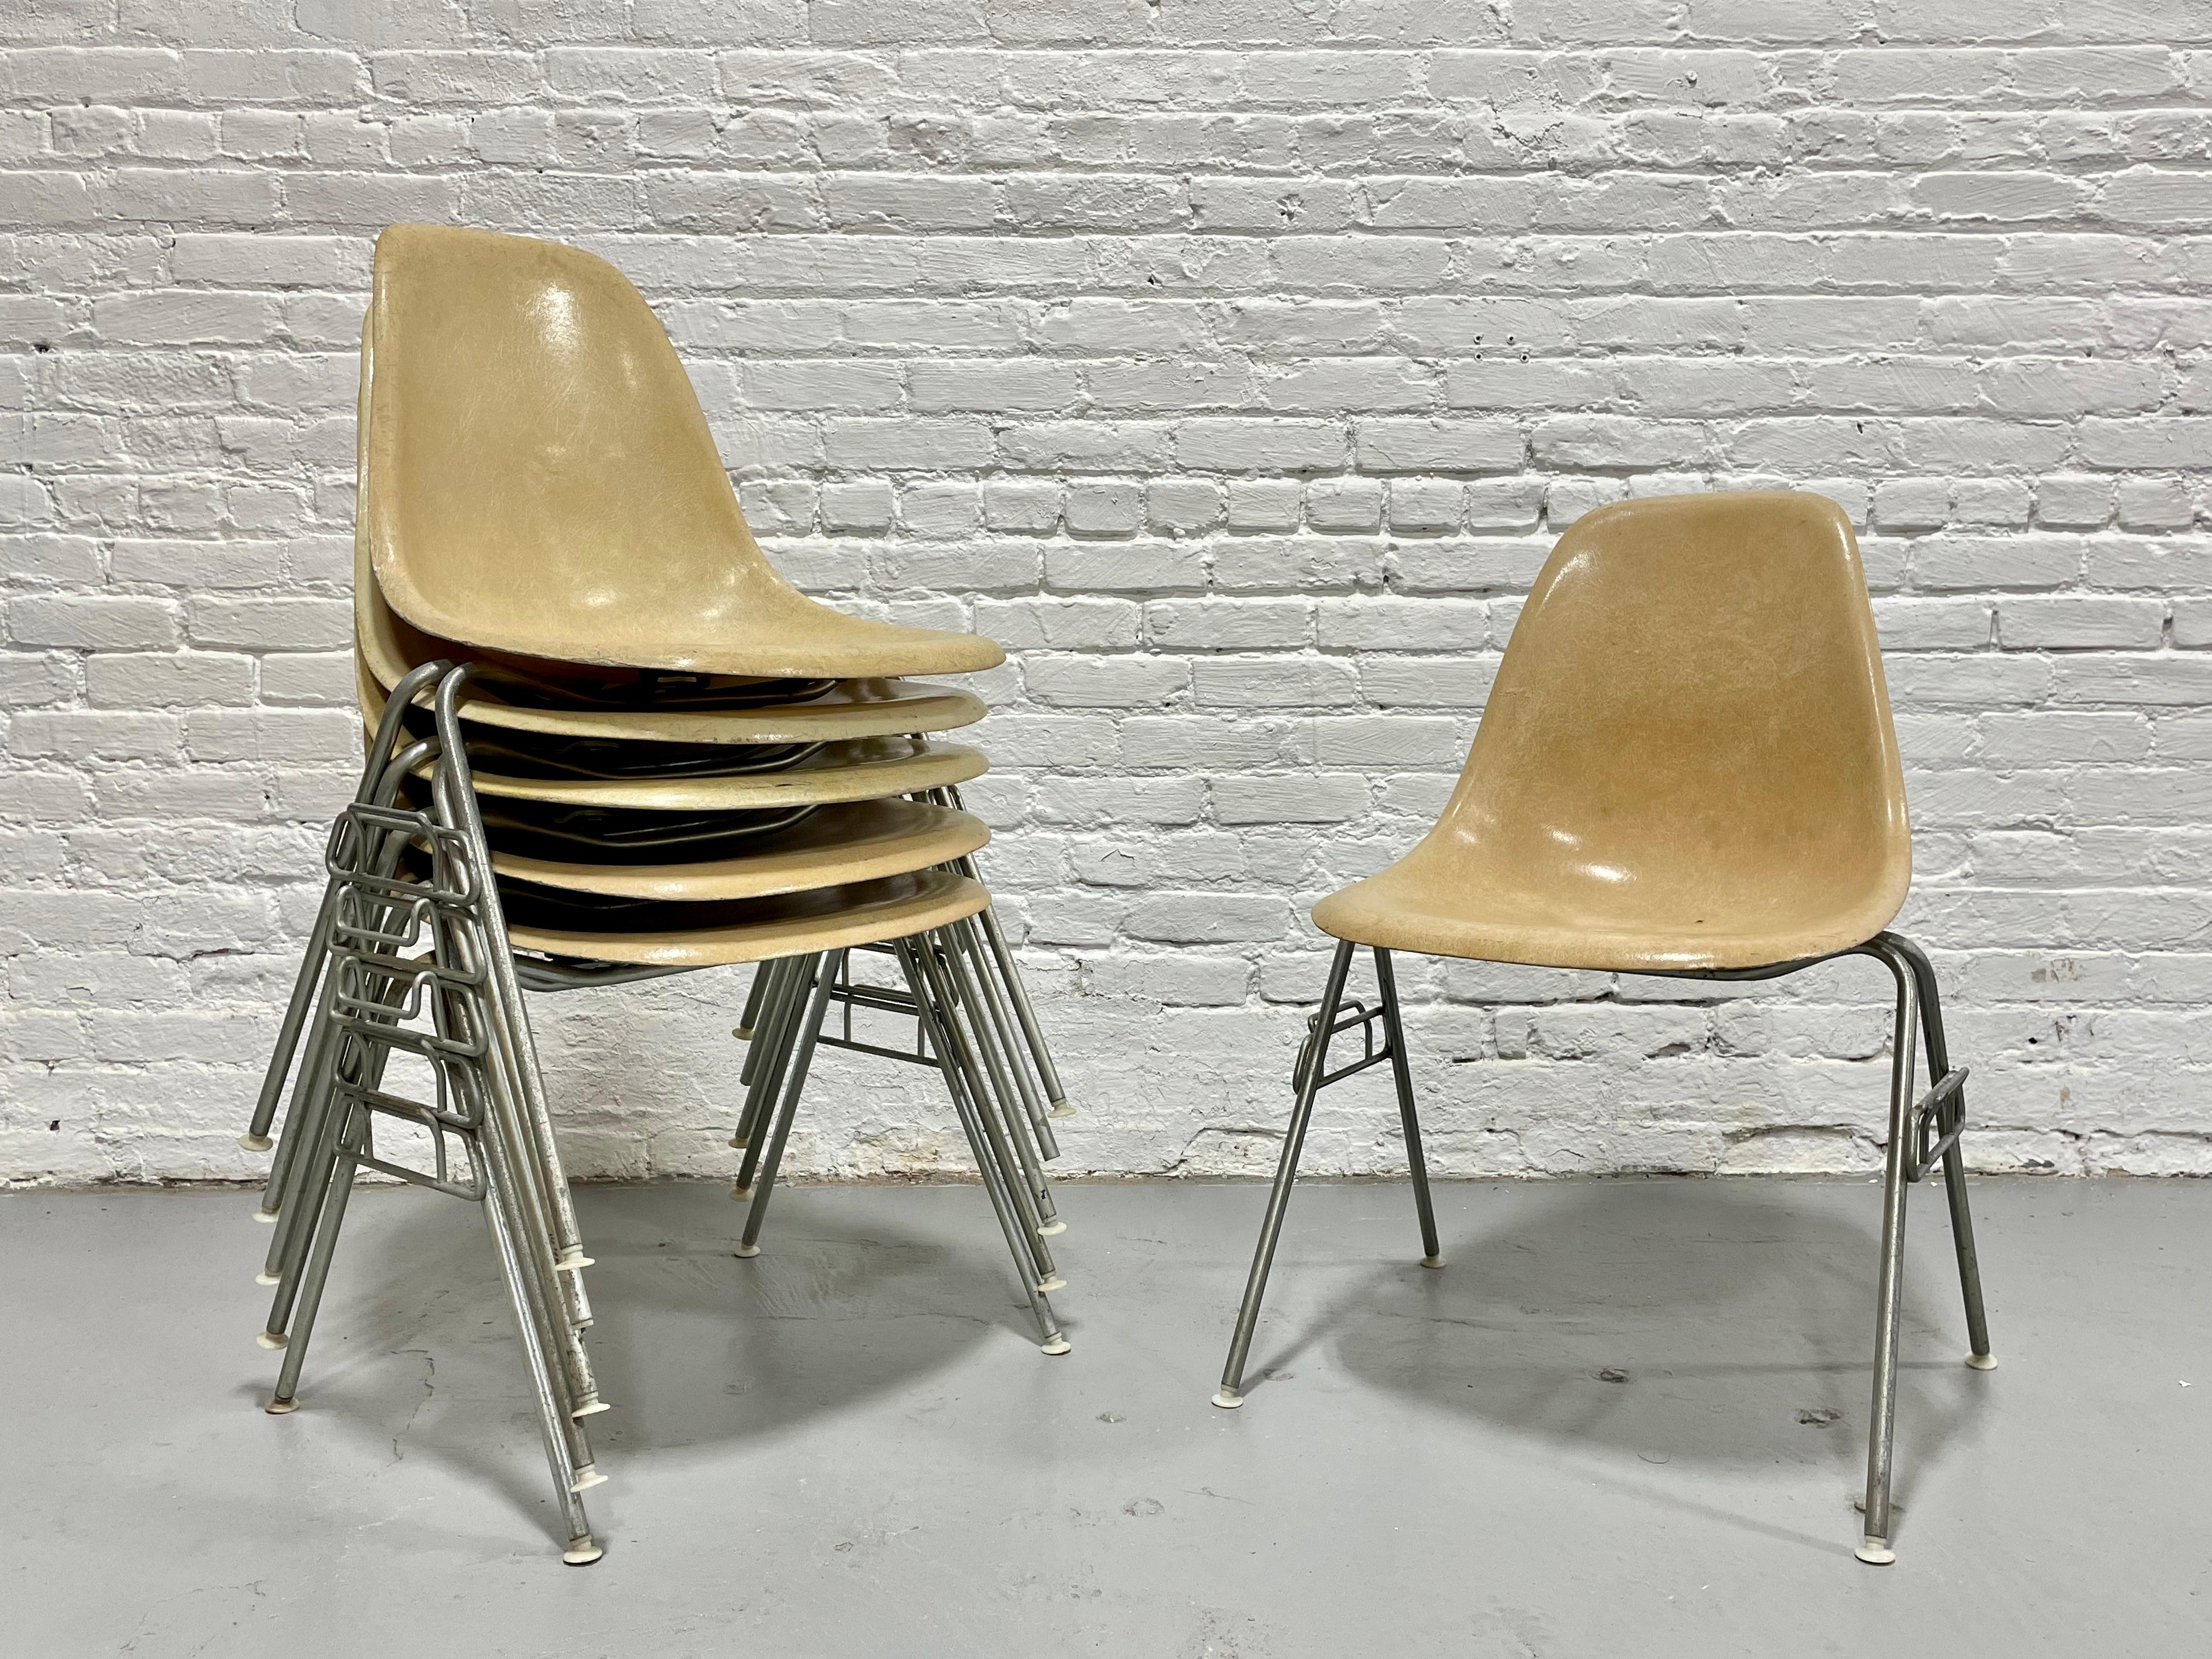 Mid Century Modern DSS stacking shell chairs designed by Charles and Ray Eames for Herman Miller in lovely neutral yellow / beige. Six available in total, two are lemon yellow and the others are yellow beige. Good vintage condition with some